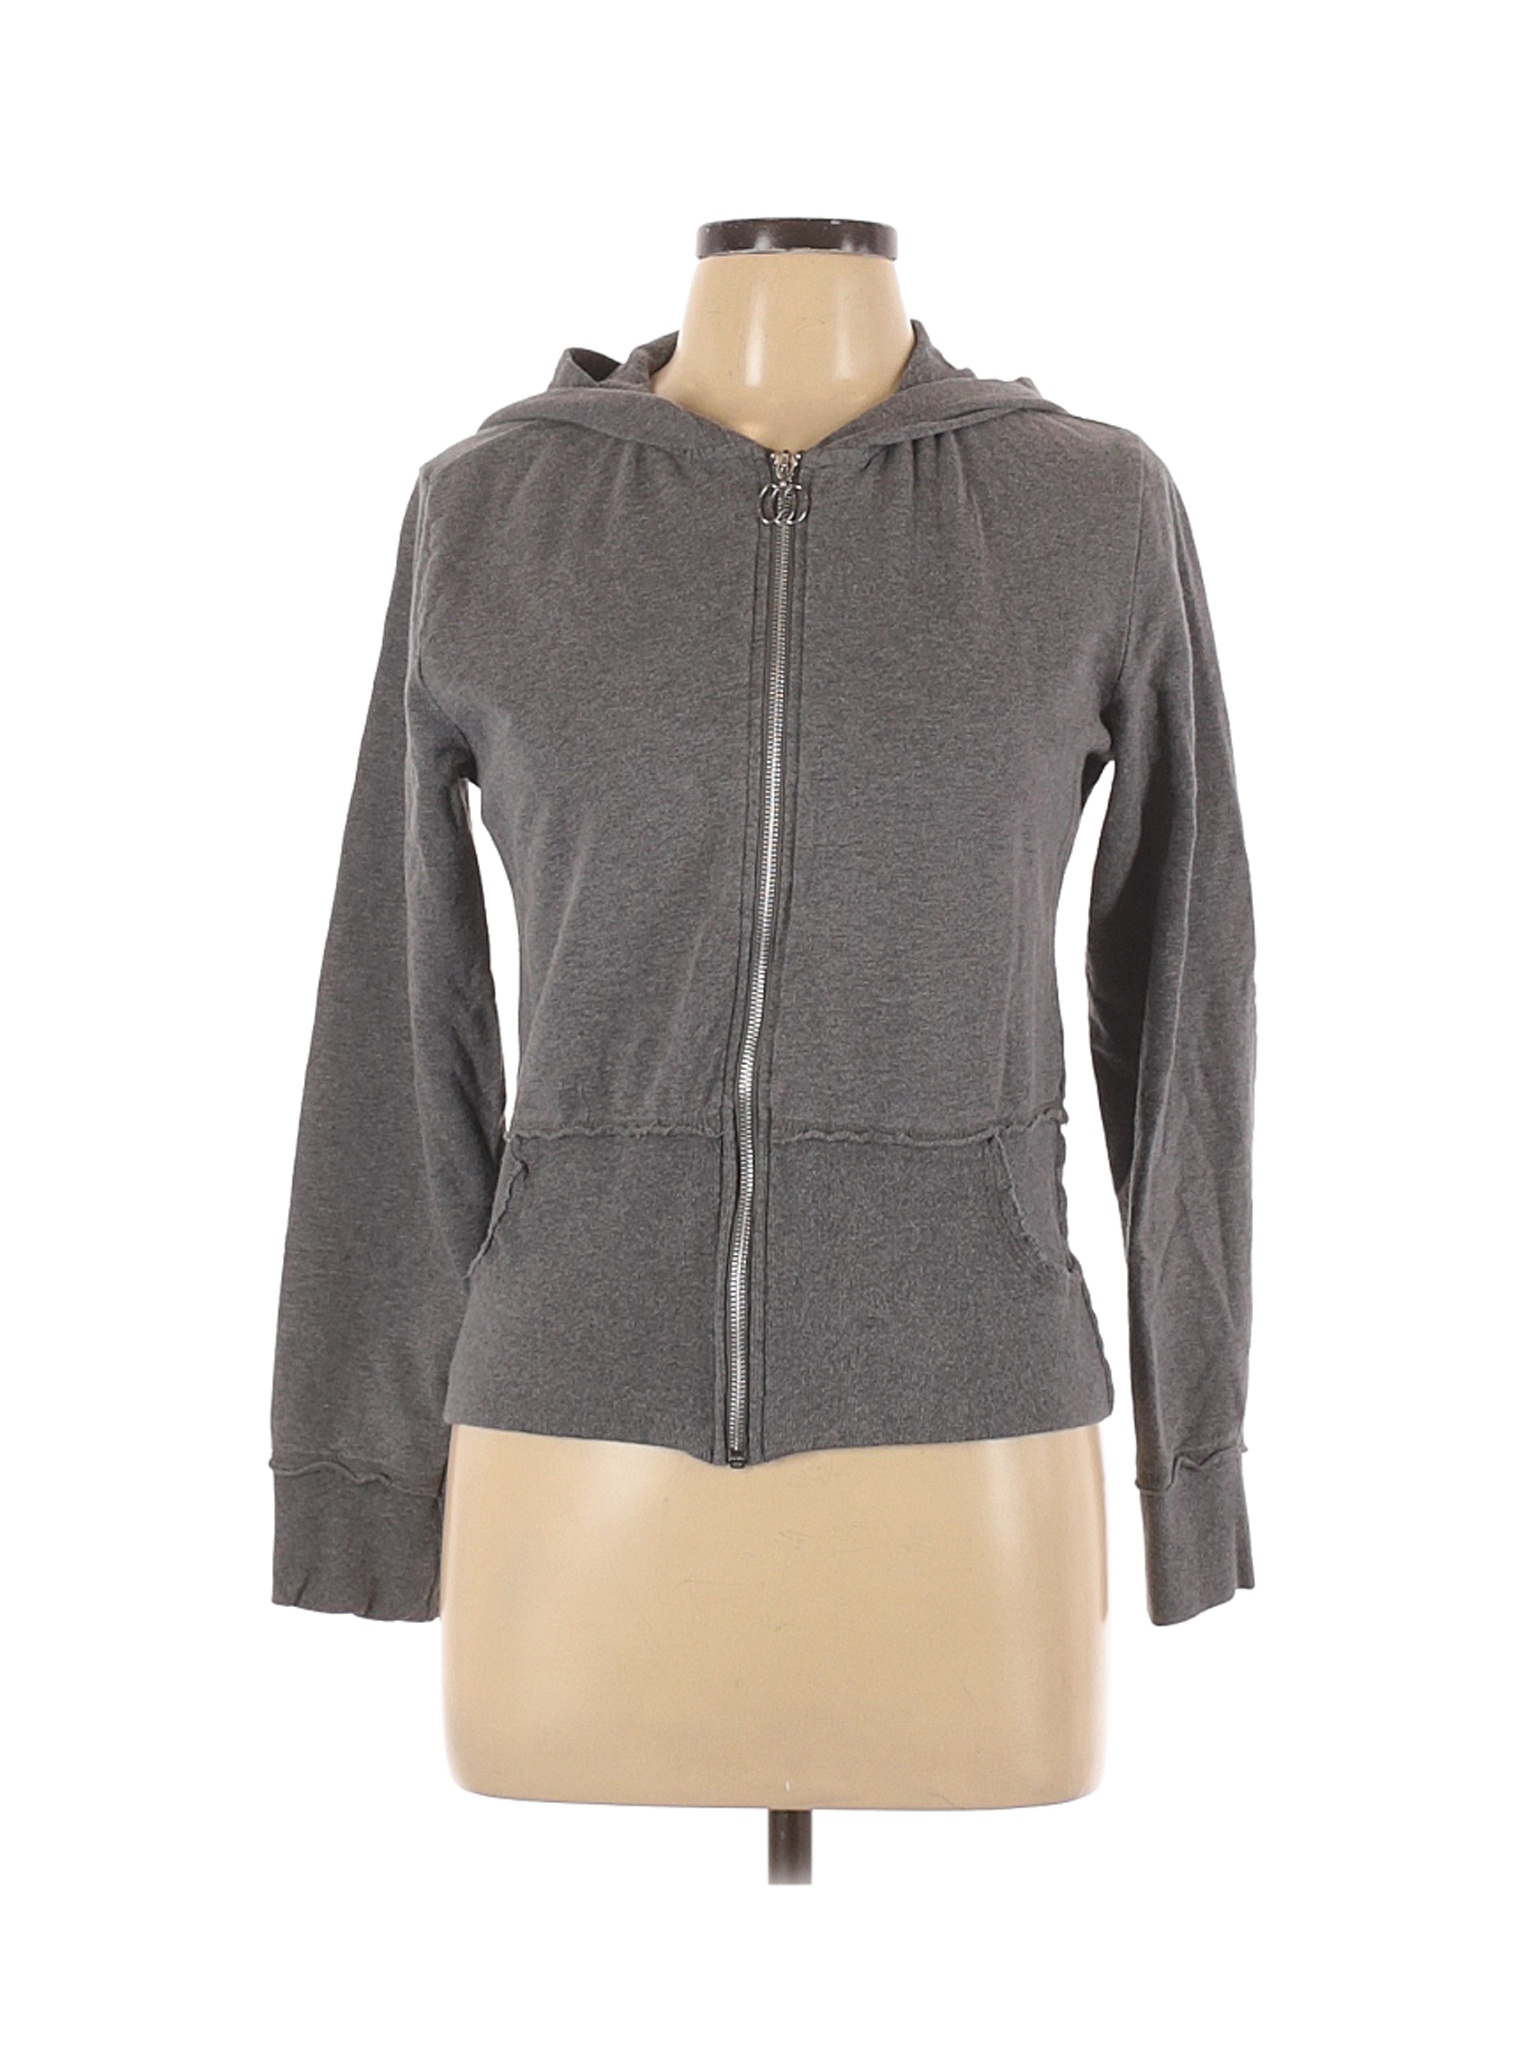 The Balance Collection by Marika Women Gray Zip Up Hoodie L | eBay